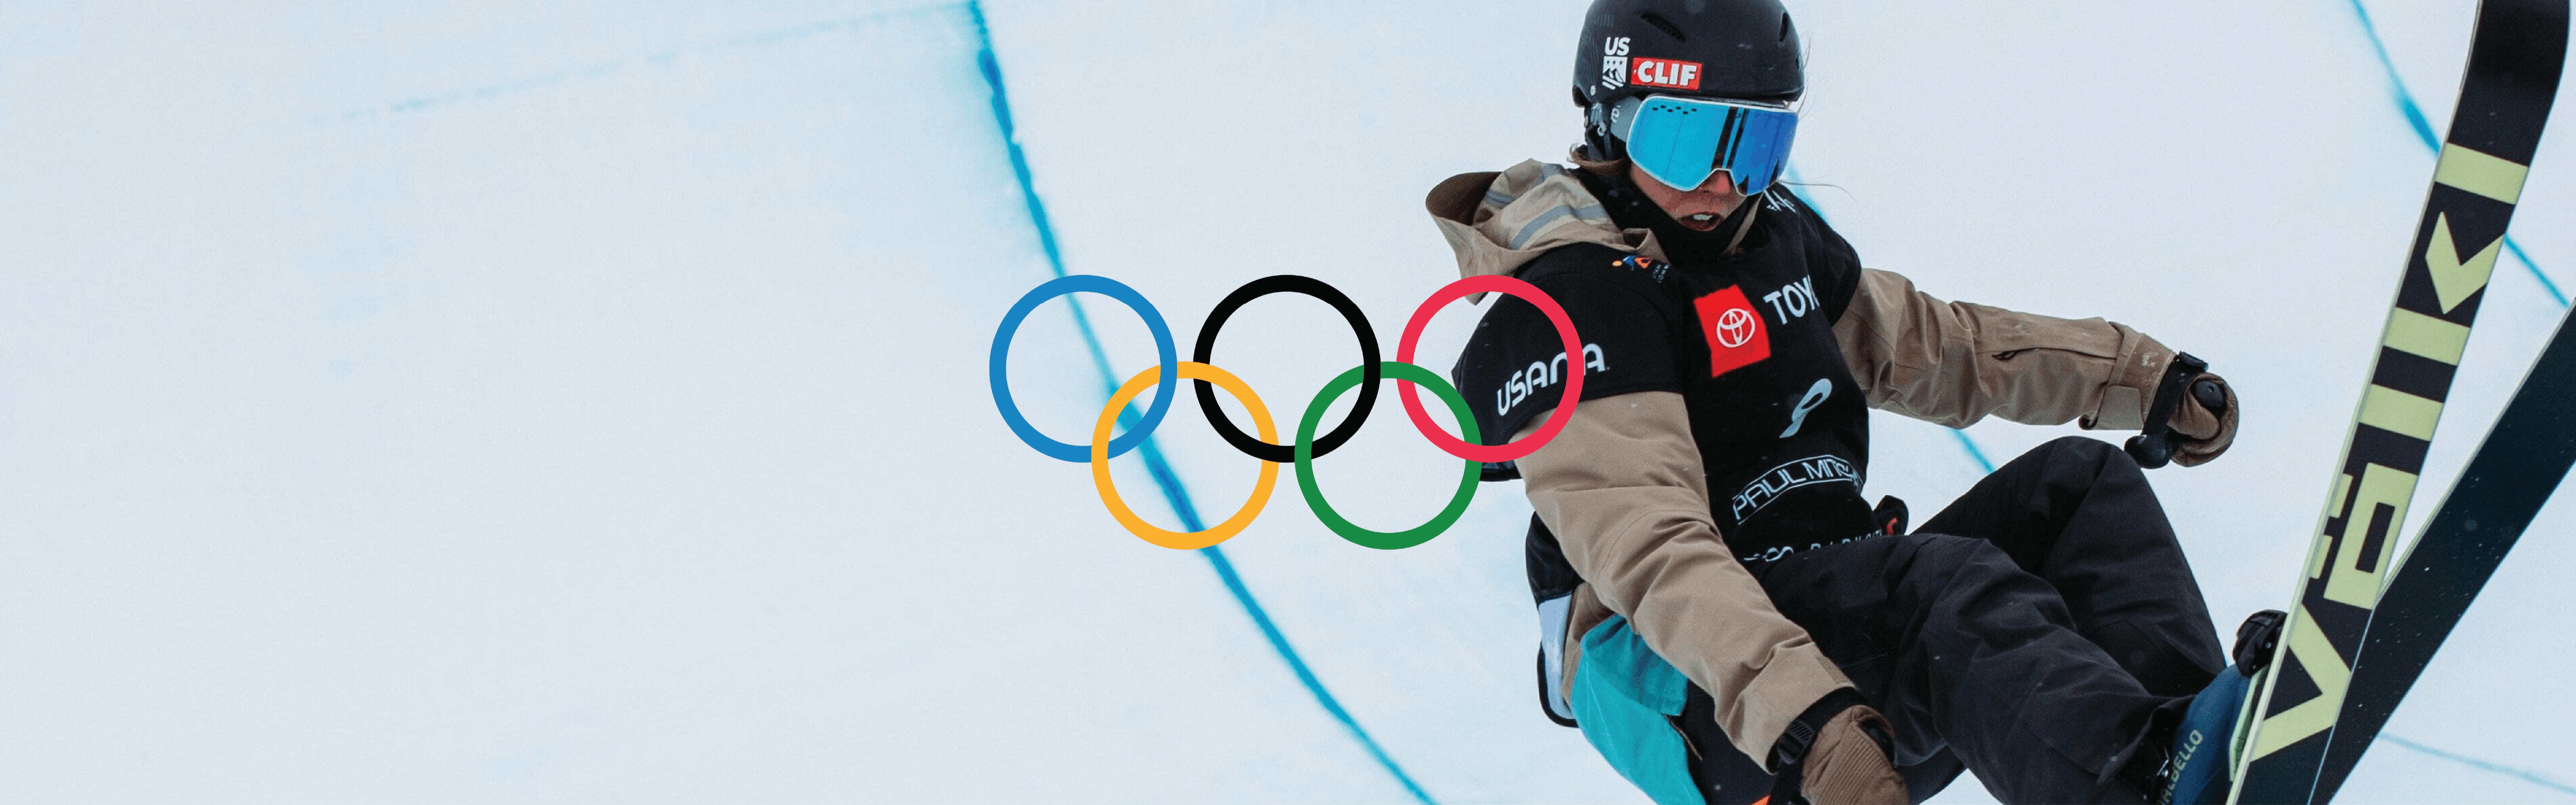 A skier comes out of the half-pipe with their Volkl skis. The Olympic rings are added on top of the image.